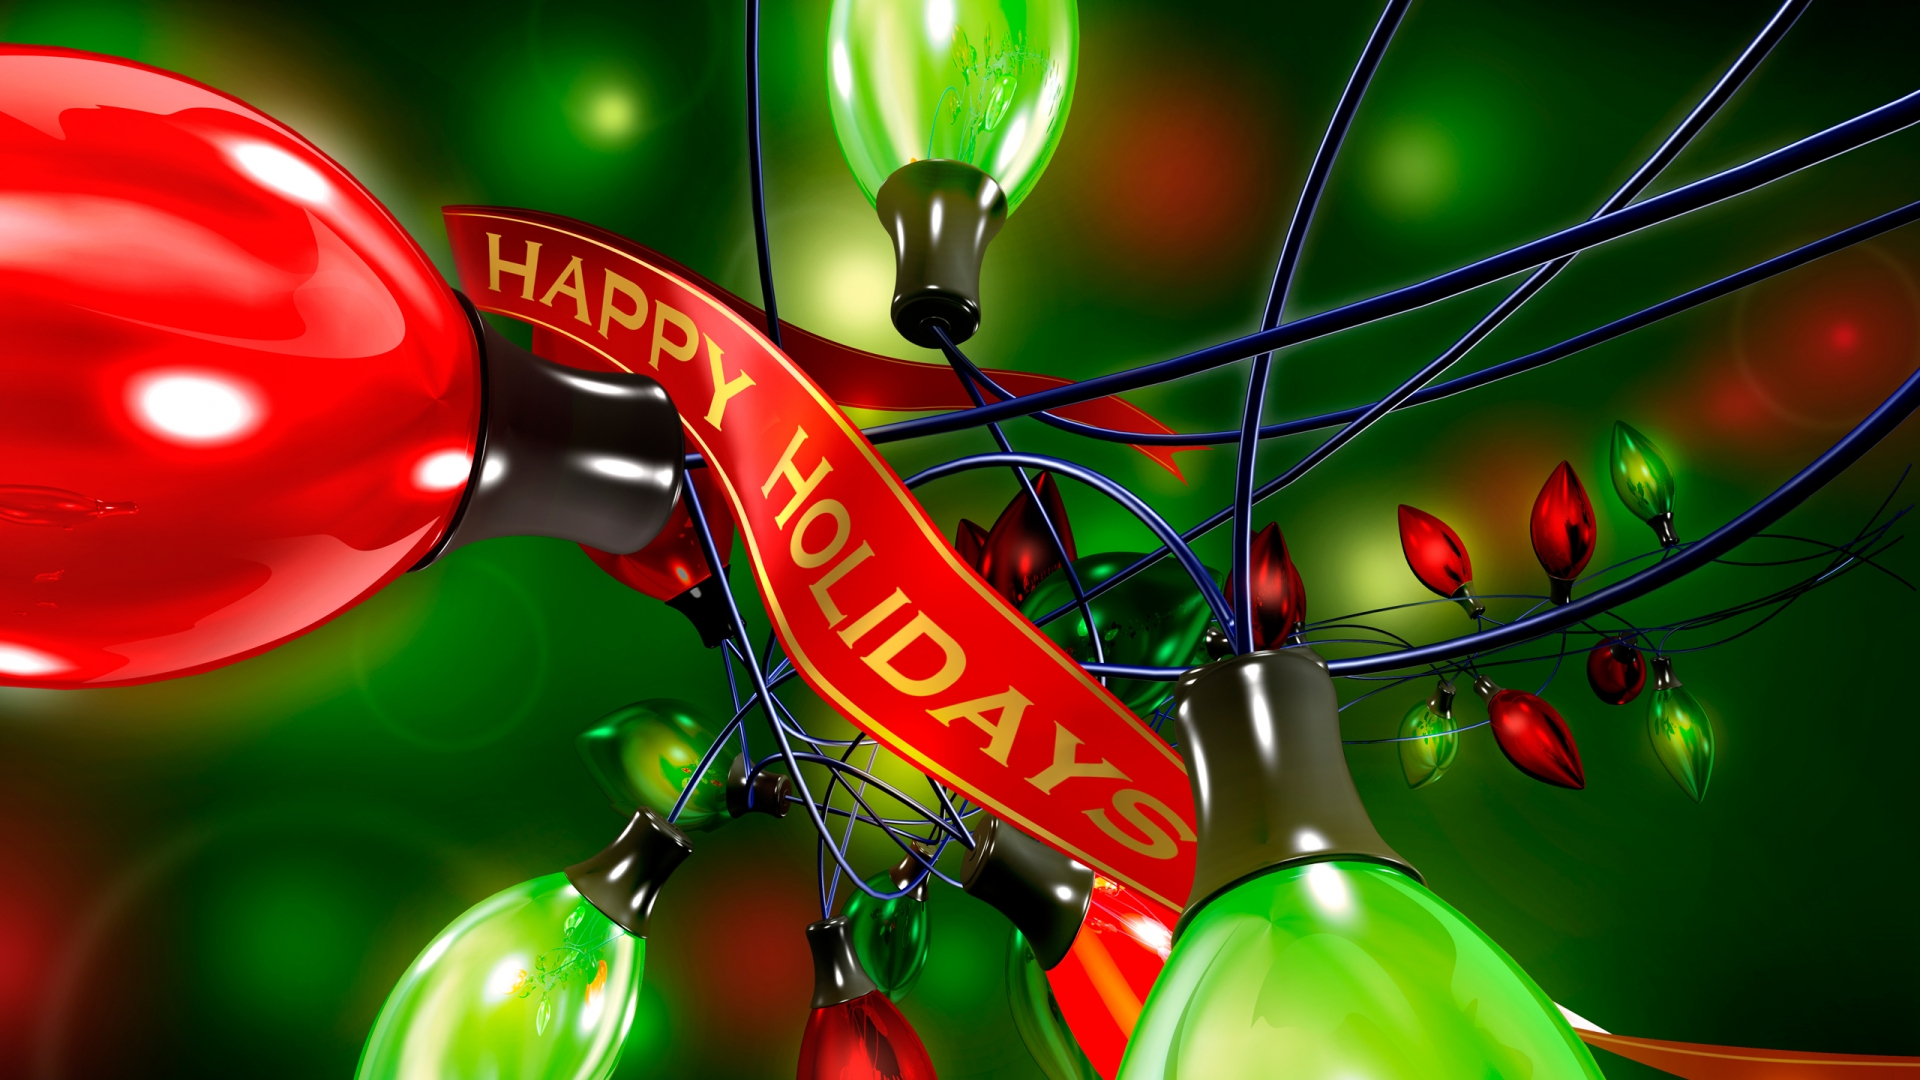 Happy Holidays Everyone for 1920 x 1080 HDTV 1080p resolution